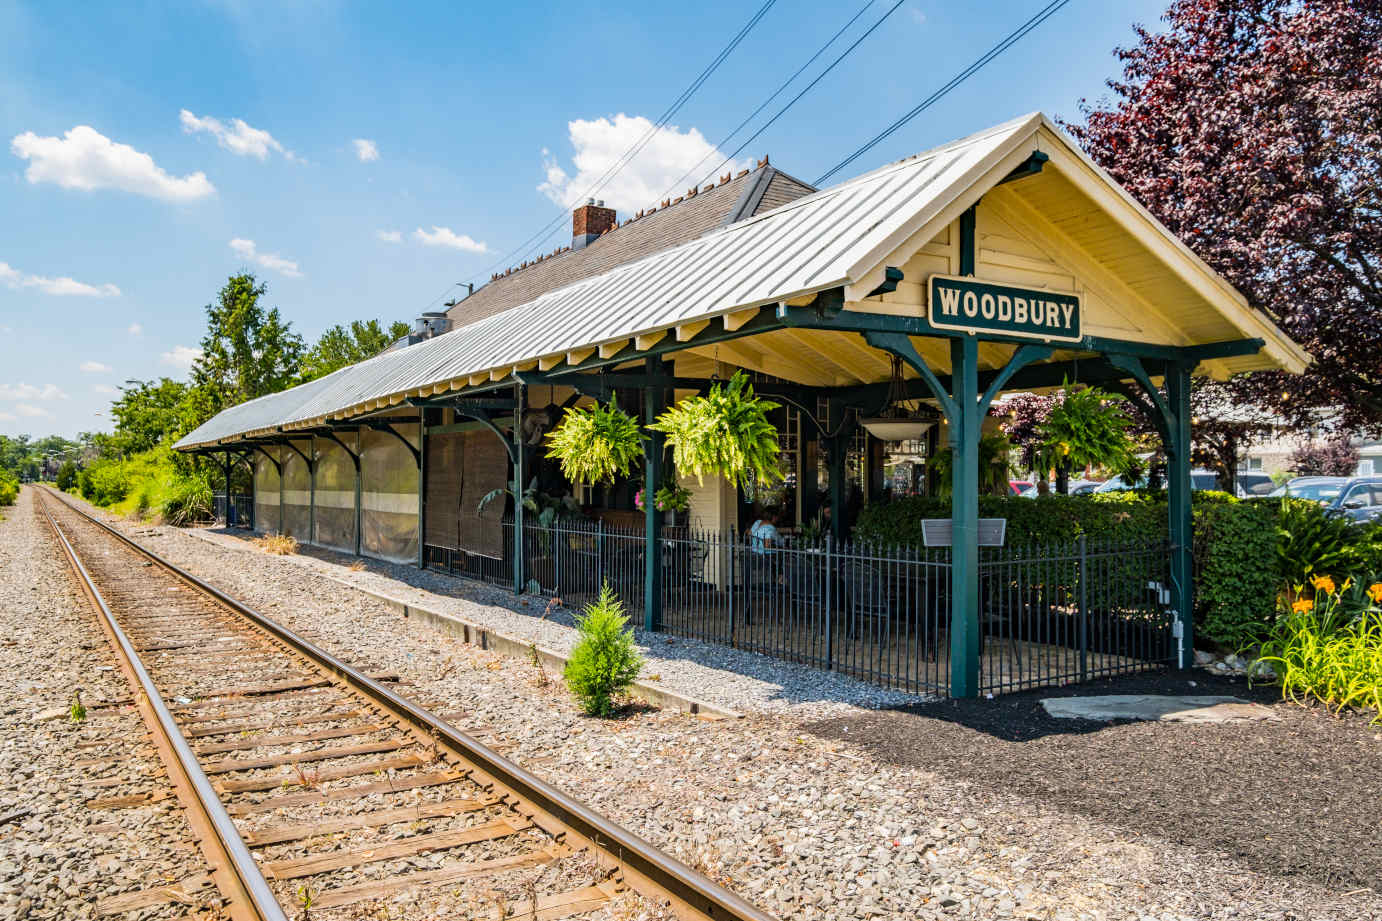 Outdoors in daylight, Woodbury Station building near a railroad track